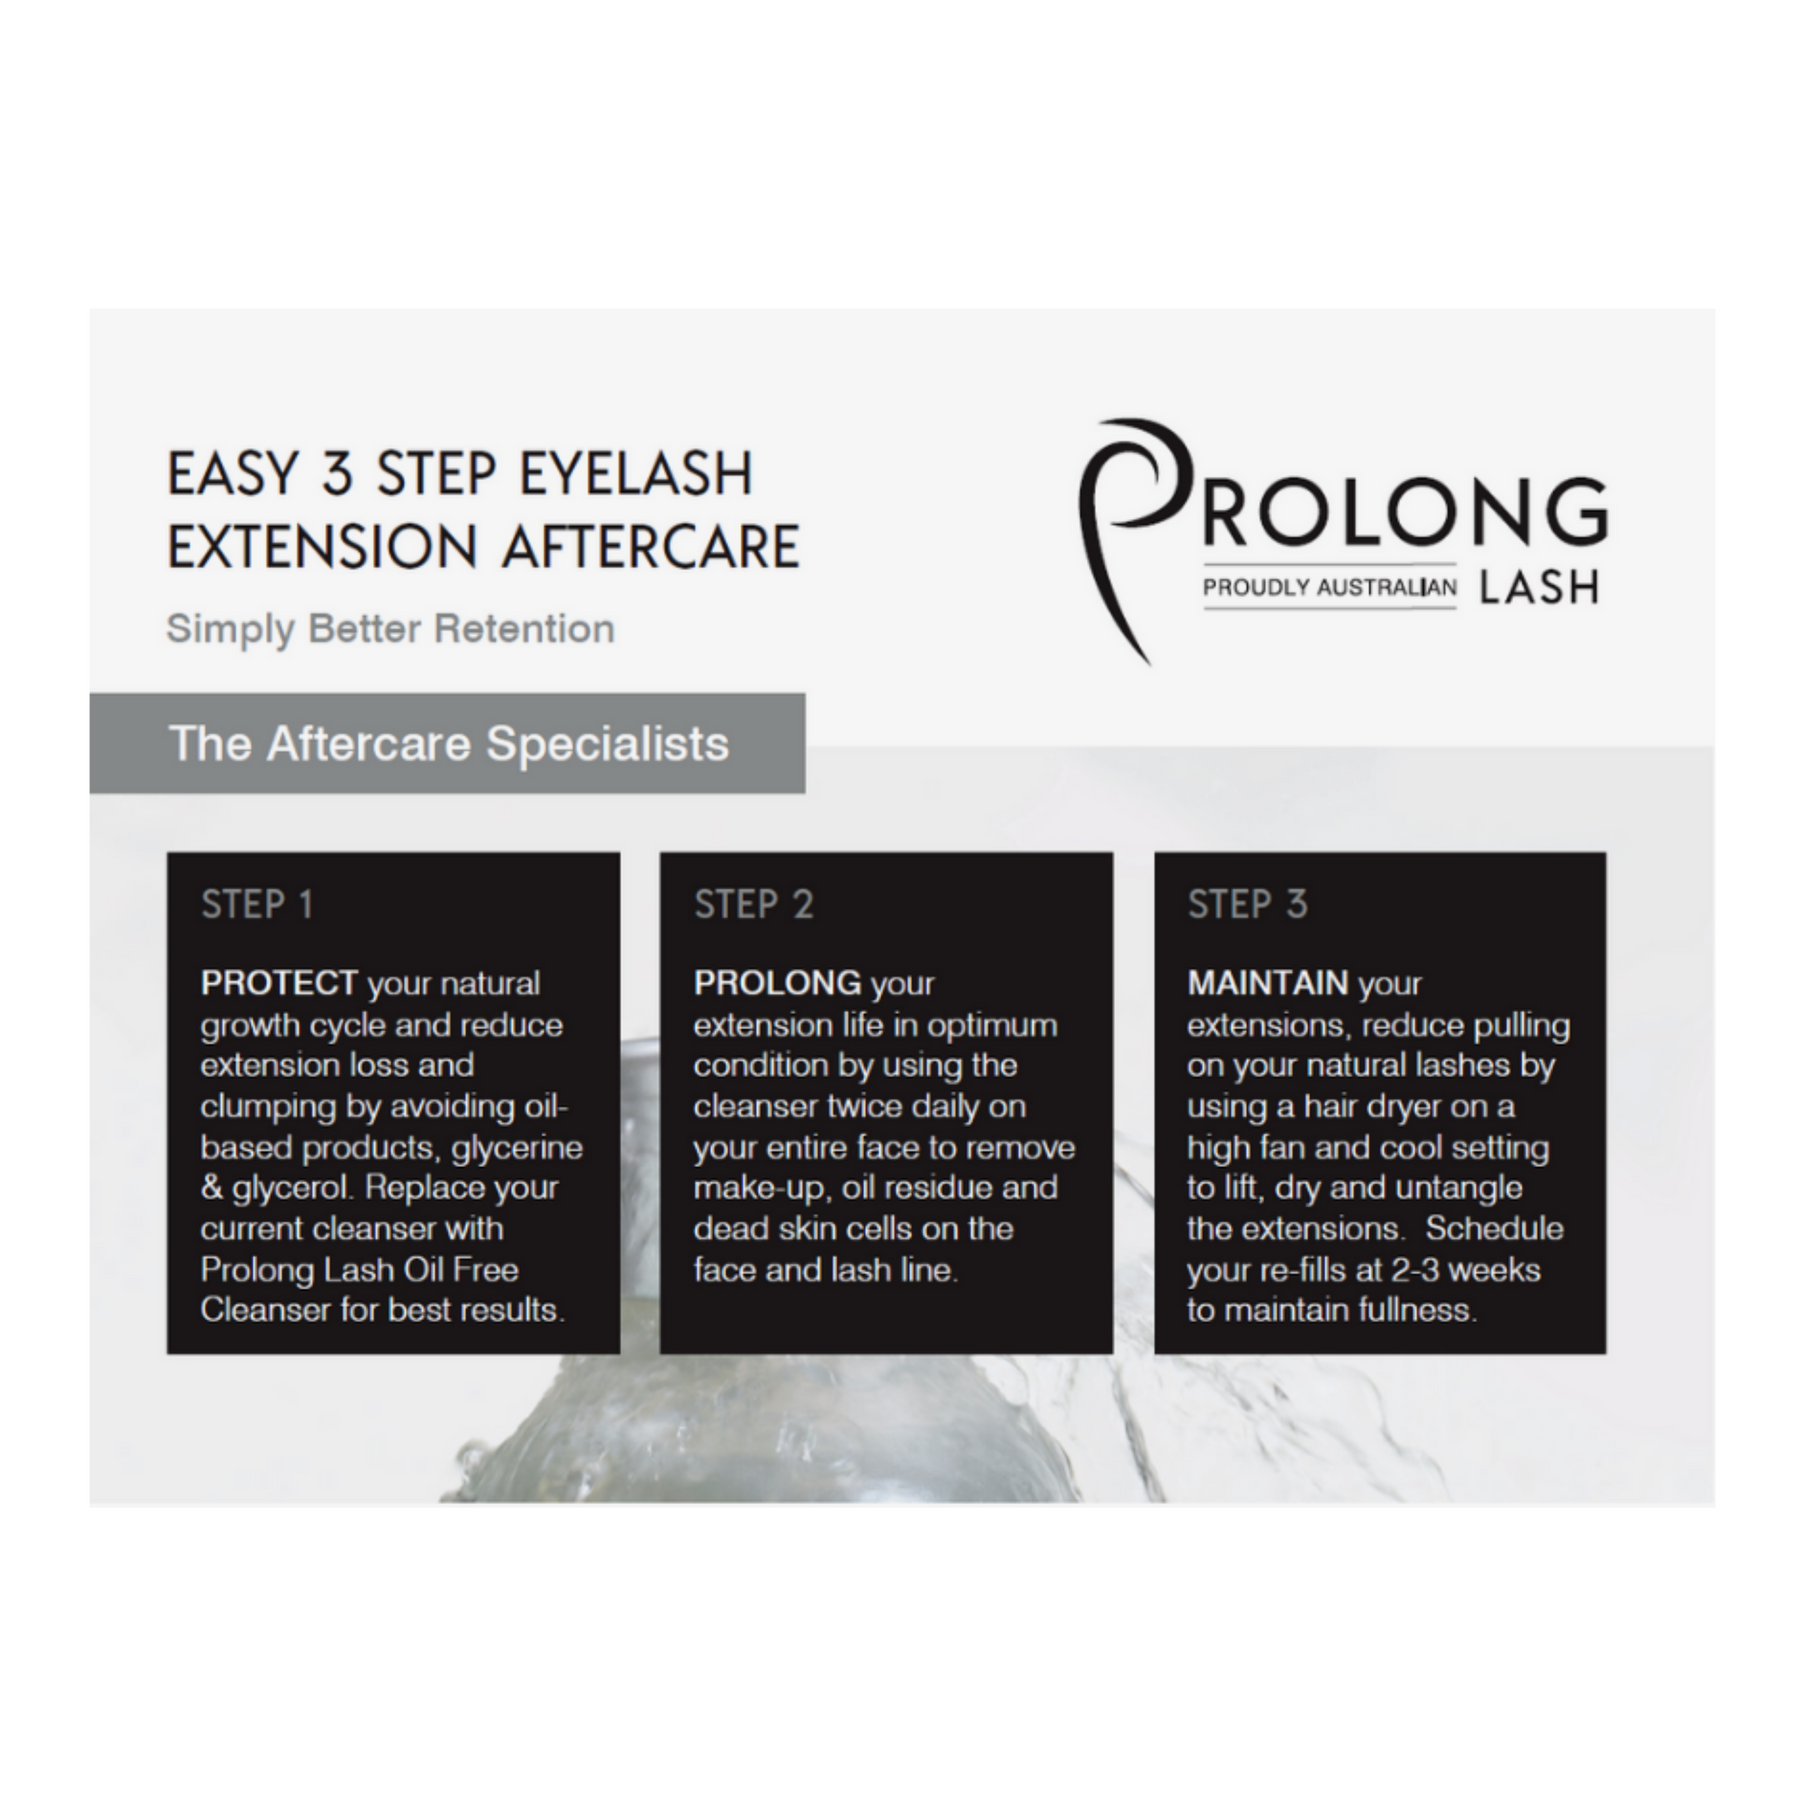 Postcard with information on 3 step process to caring for eyelash extensions